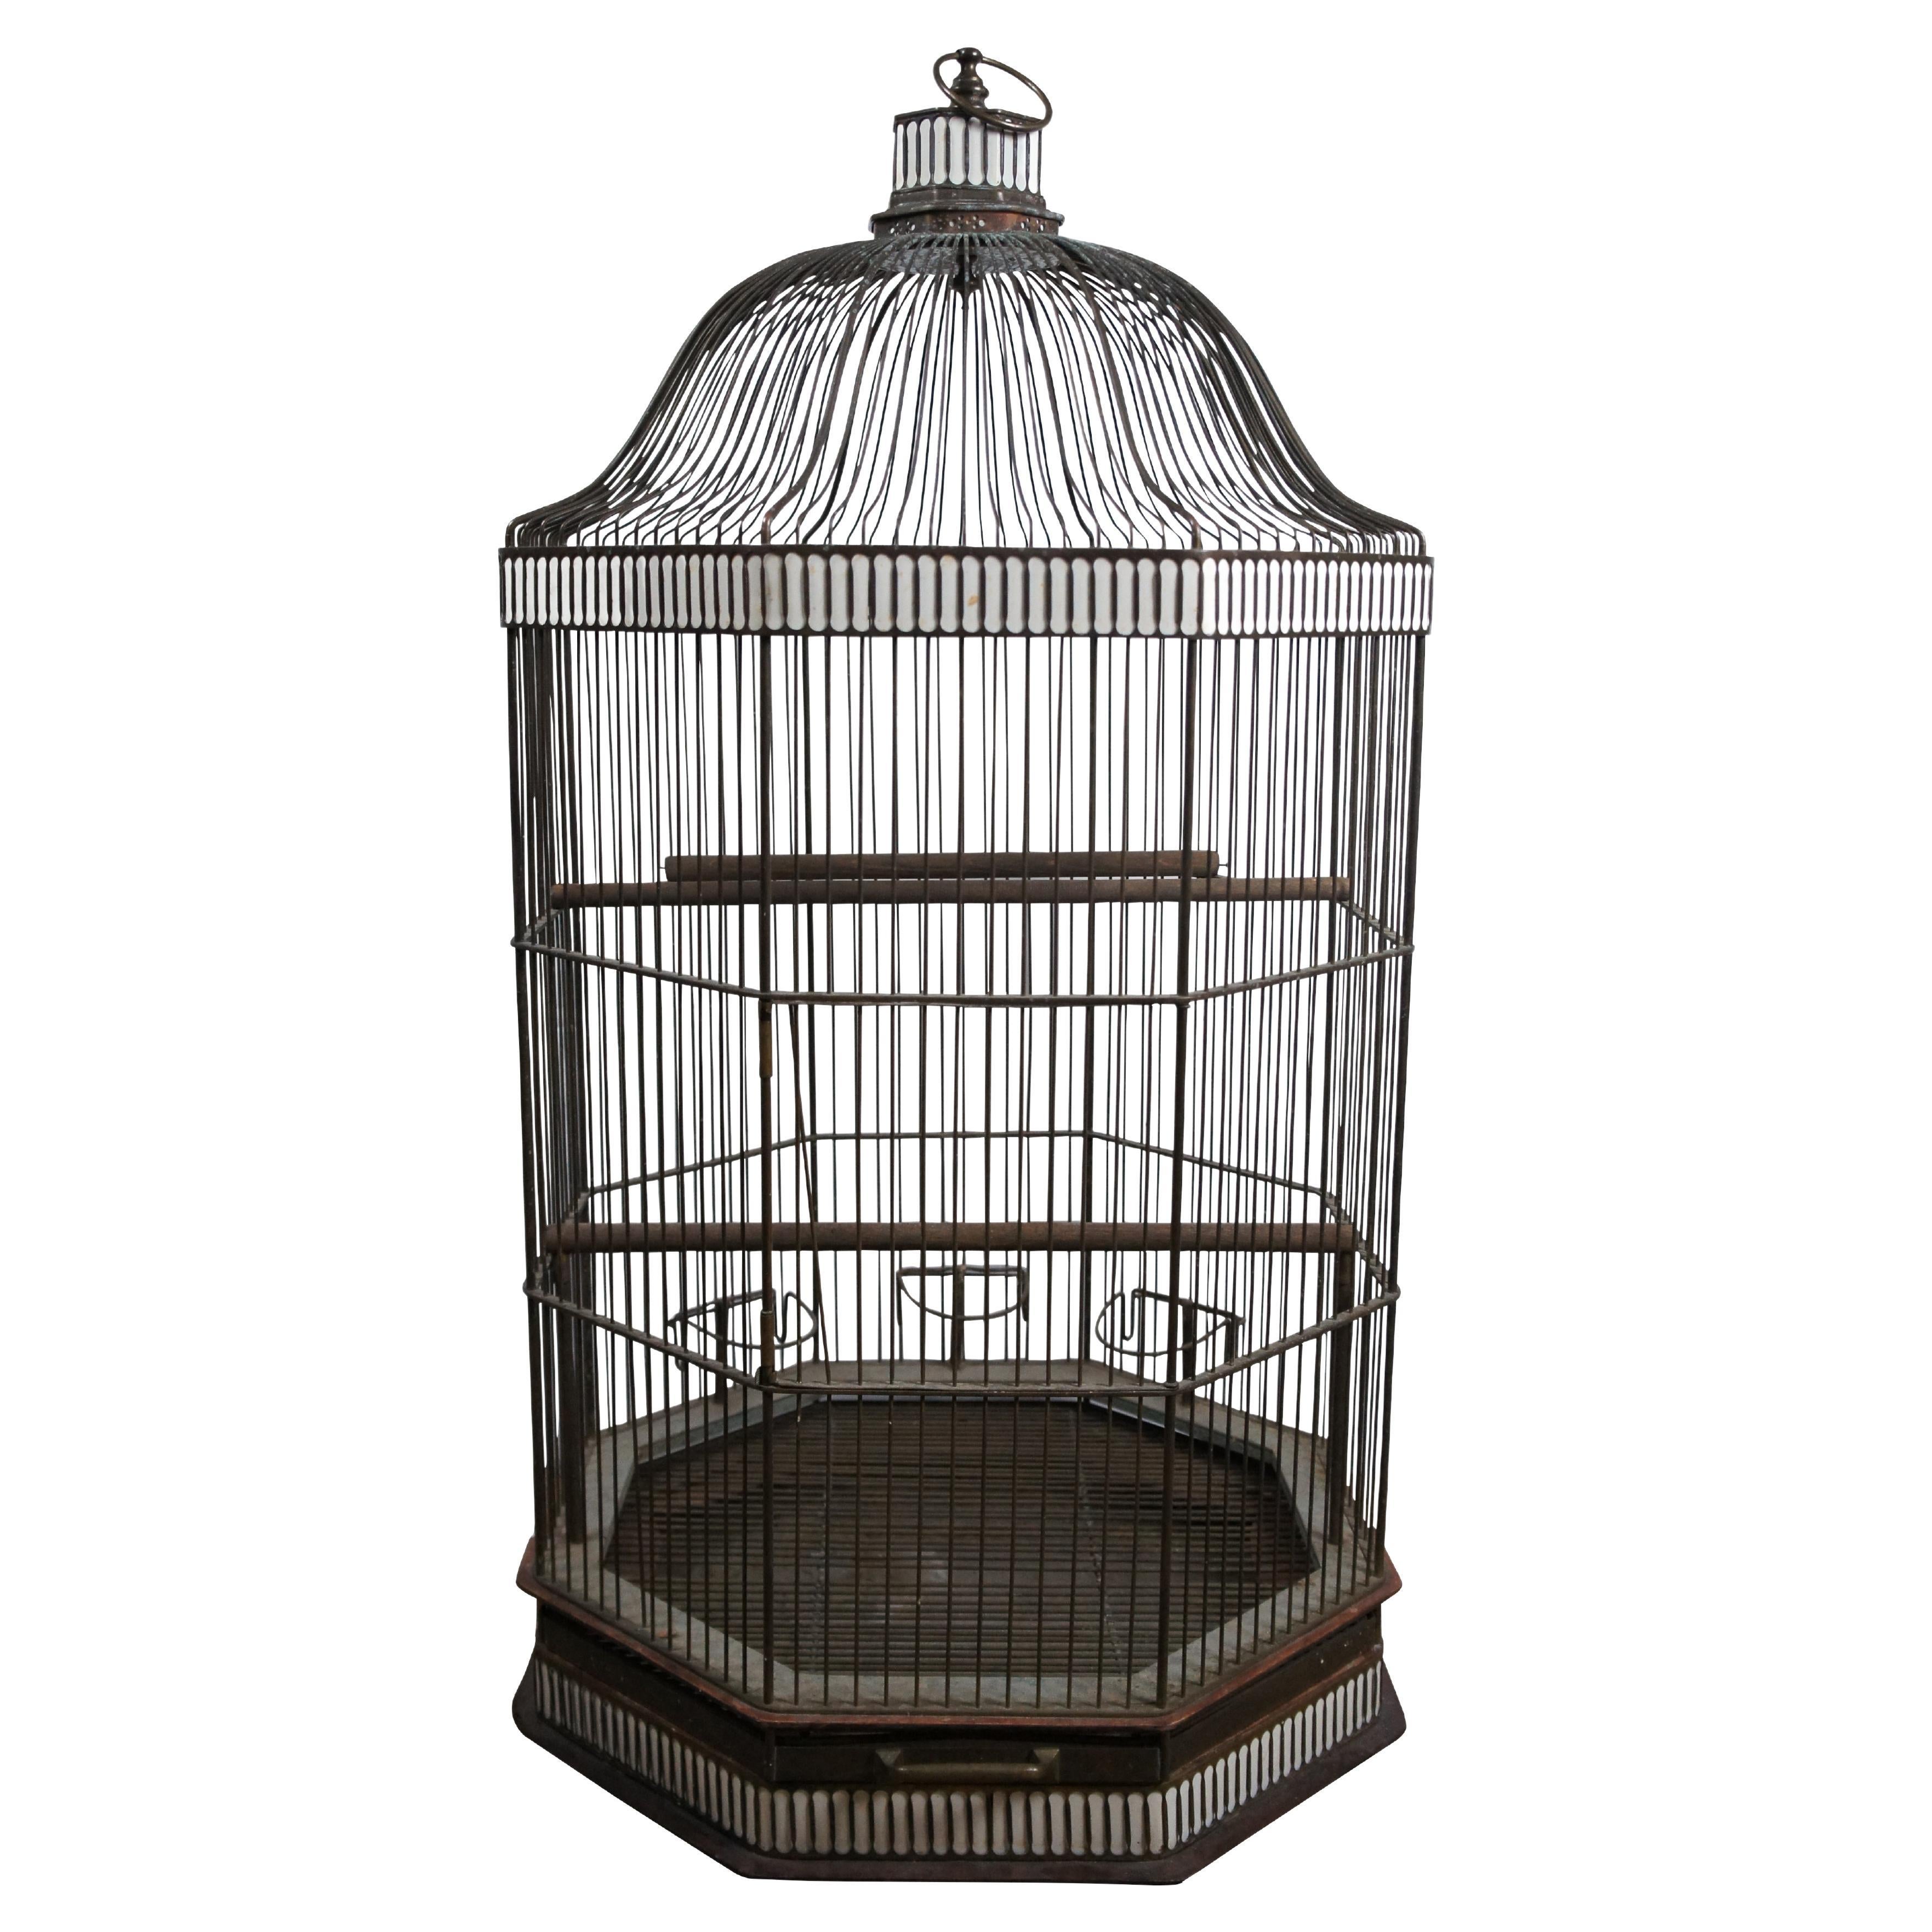 VINTAGE VICTORIAN STYLE ART DECO HENDRYX HANGING METAL WIRE DOME BIRD CAGE